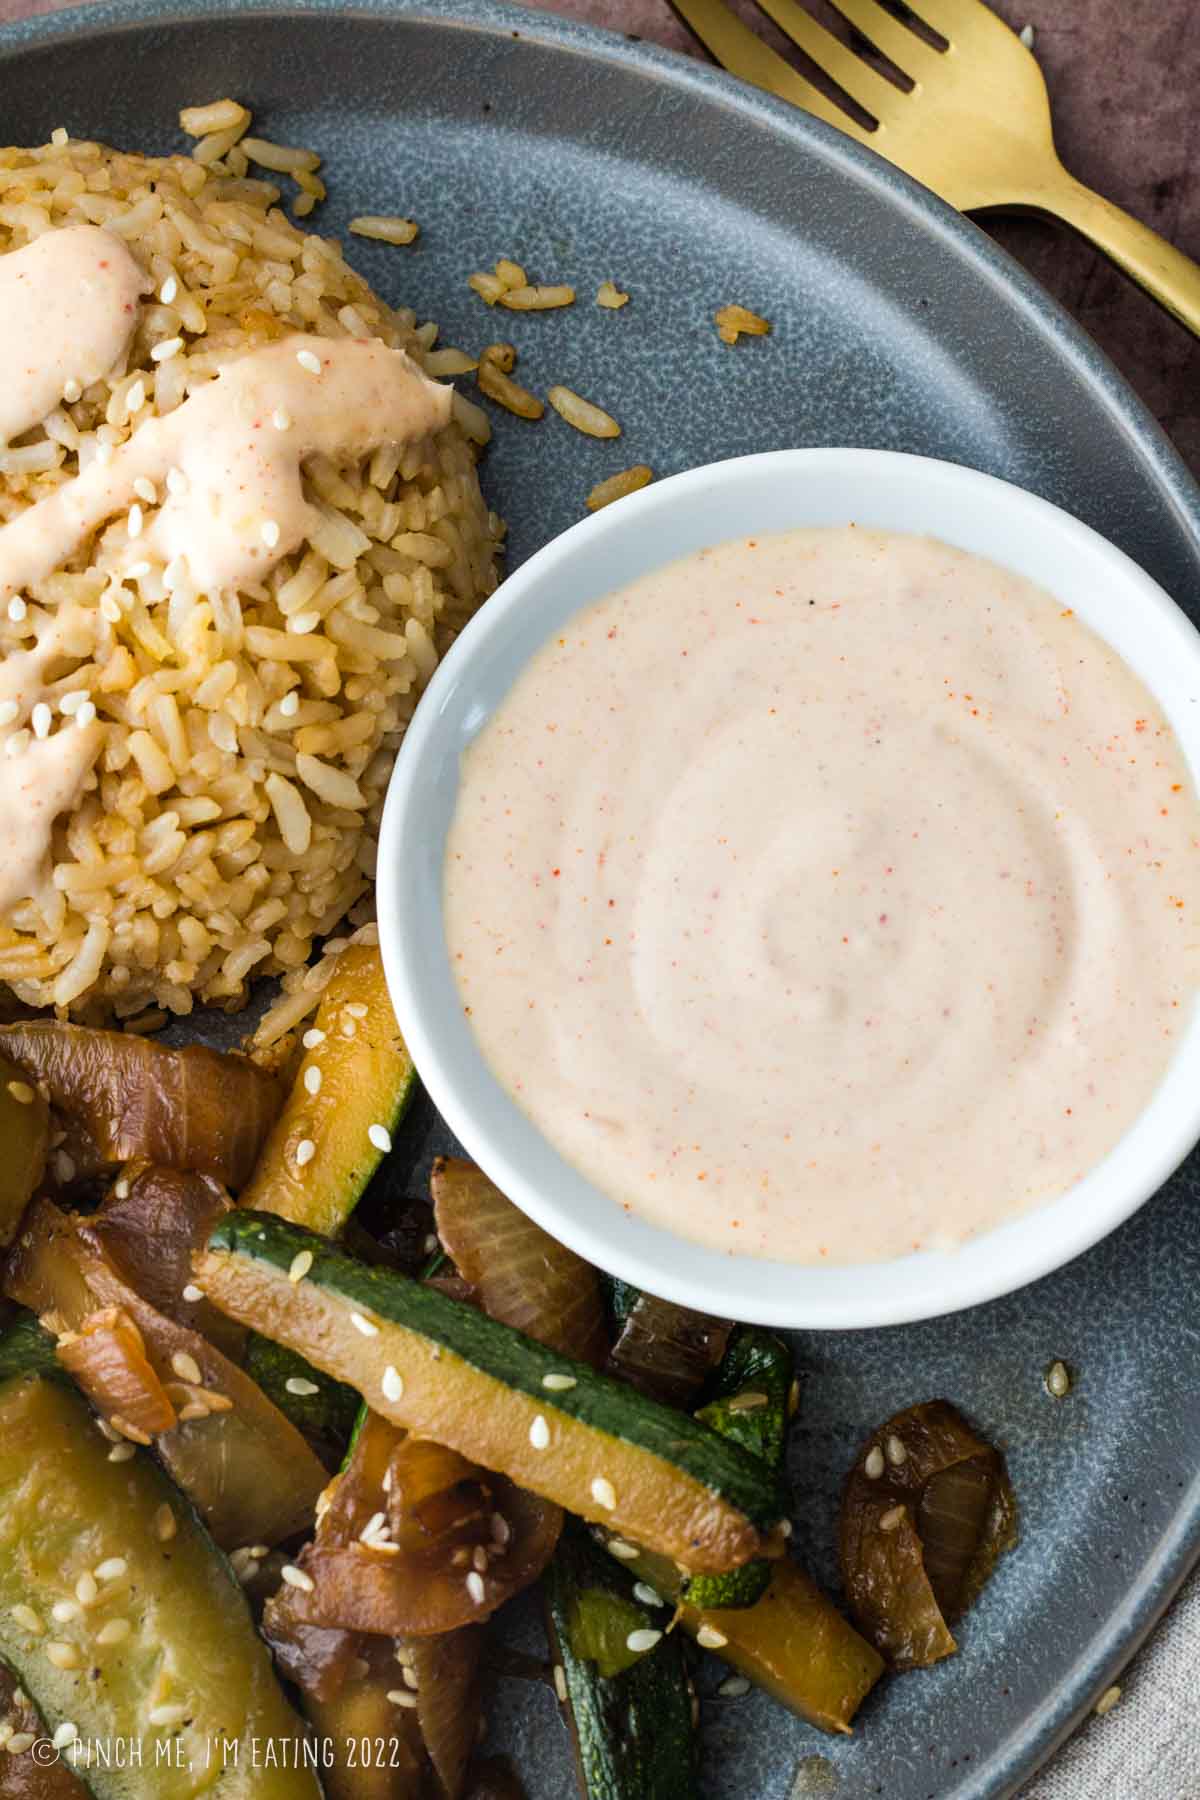 Yum yum sauce (Japanese white sauce) in a dipping sauce bowl on a plate with hibachi rice and zucchini.